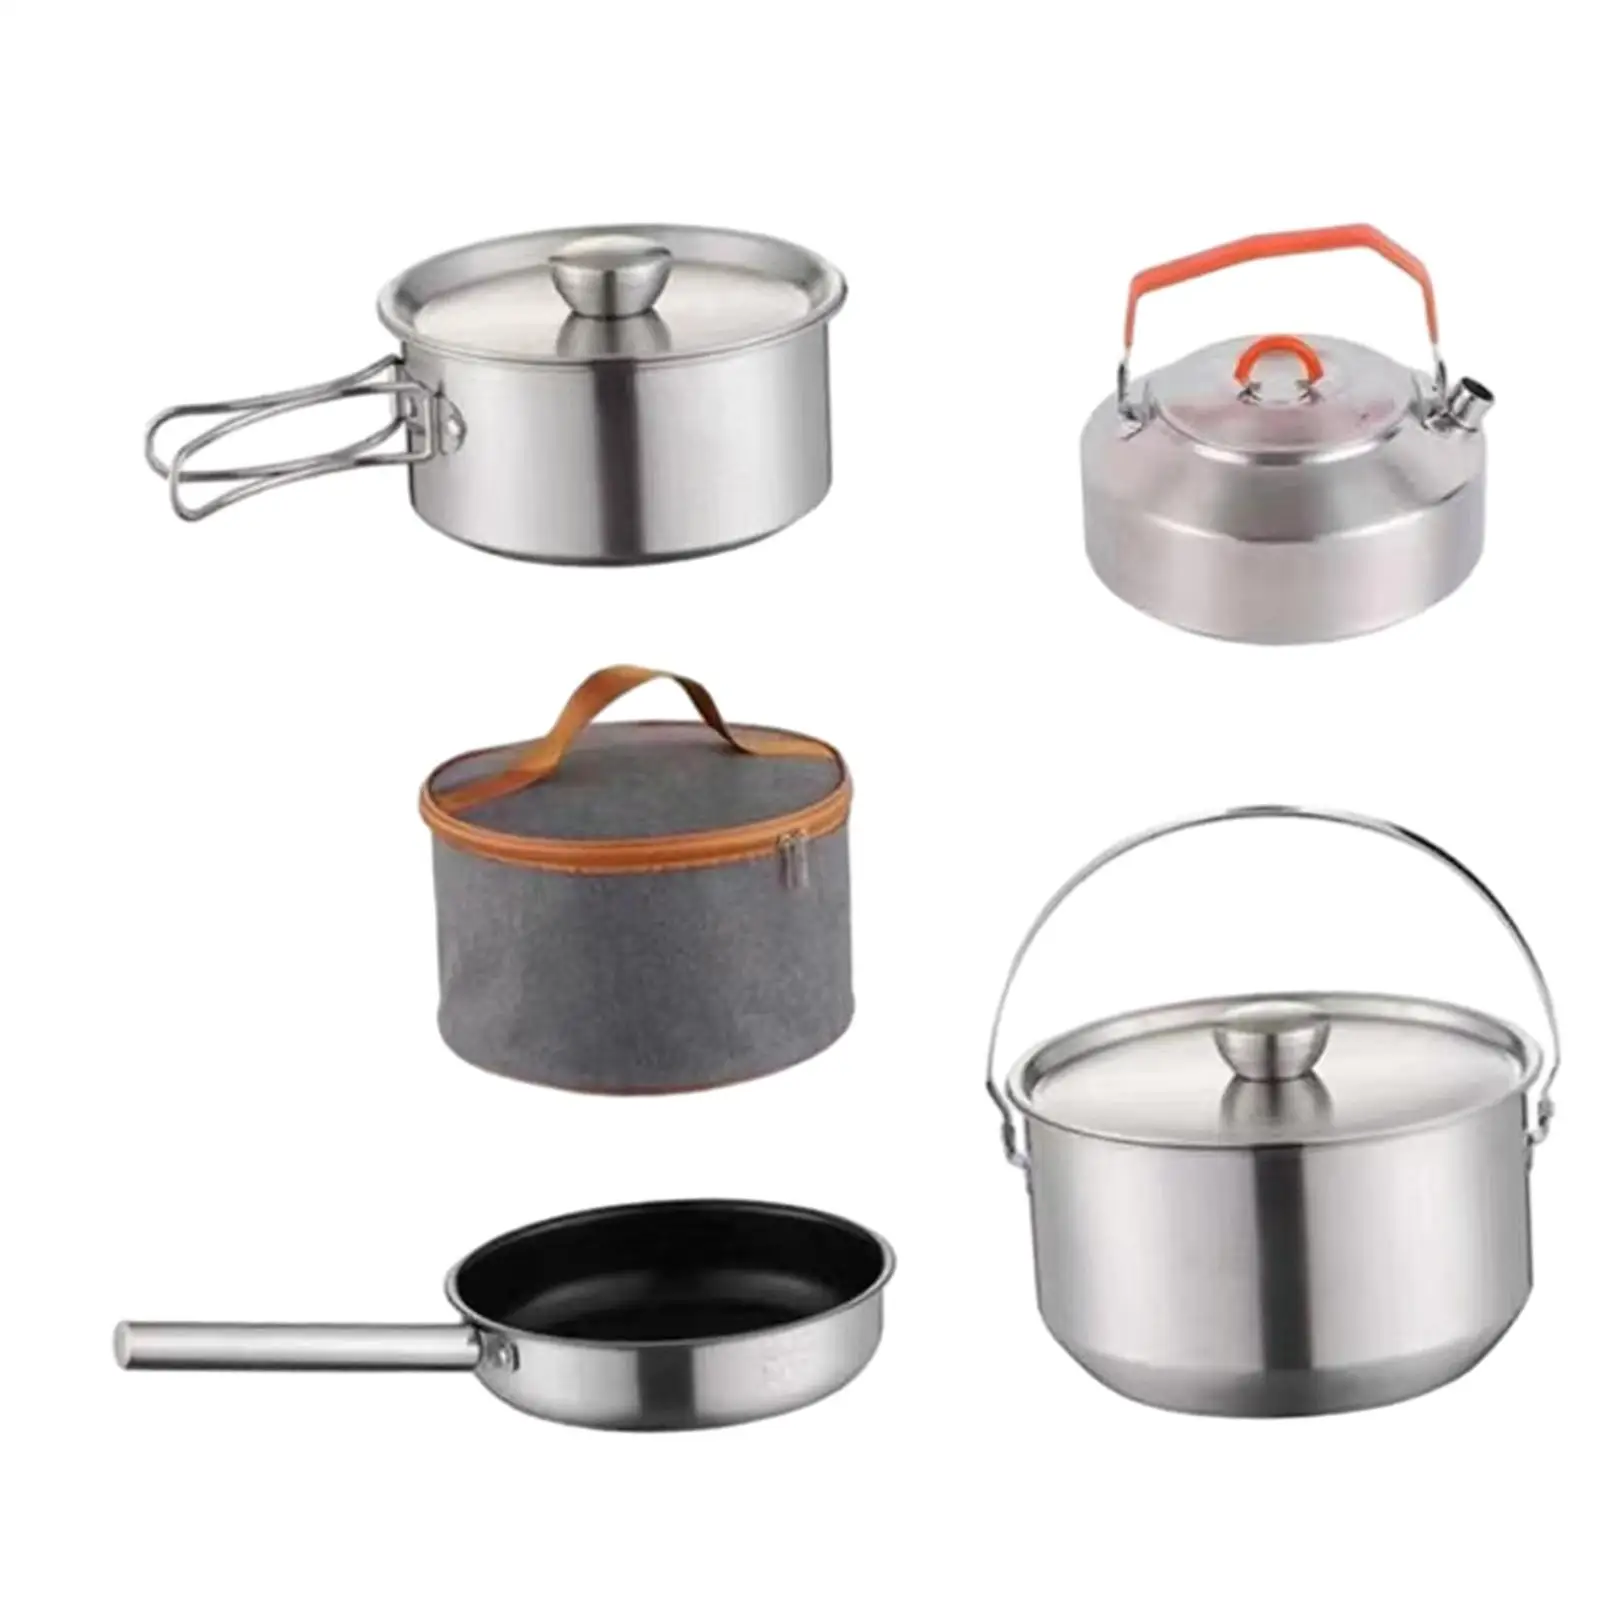 Camping Cookware Kit Cooking Set Tableware Hanging Pot Nonstick Cookset with Kettle for Dinner Hiking Travel Fishing Indoors